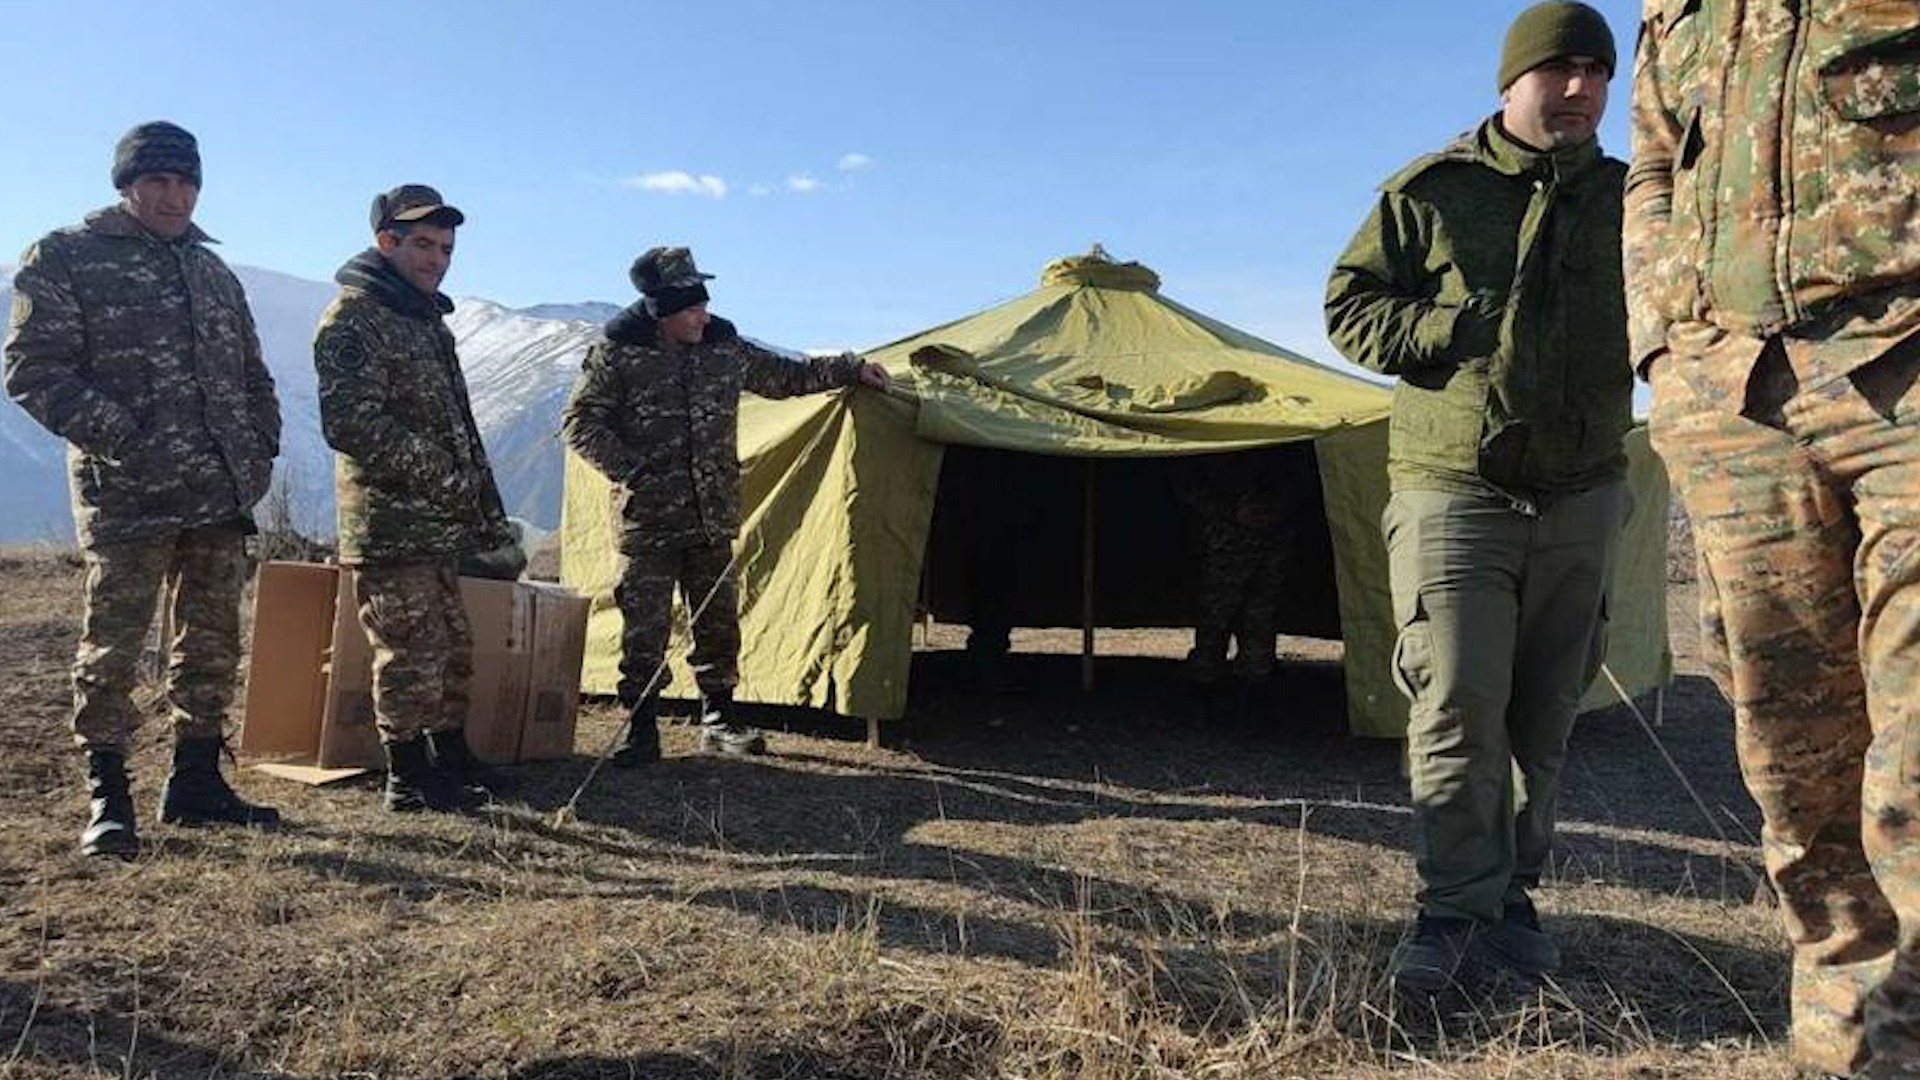 Tents for Armenian Heroes – On a Mission to the Frontlines